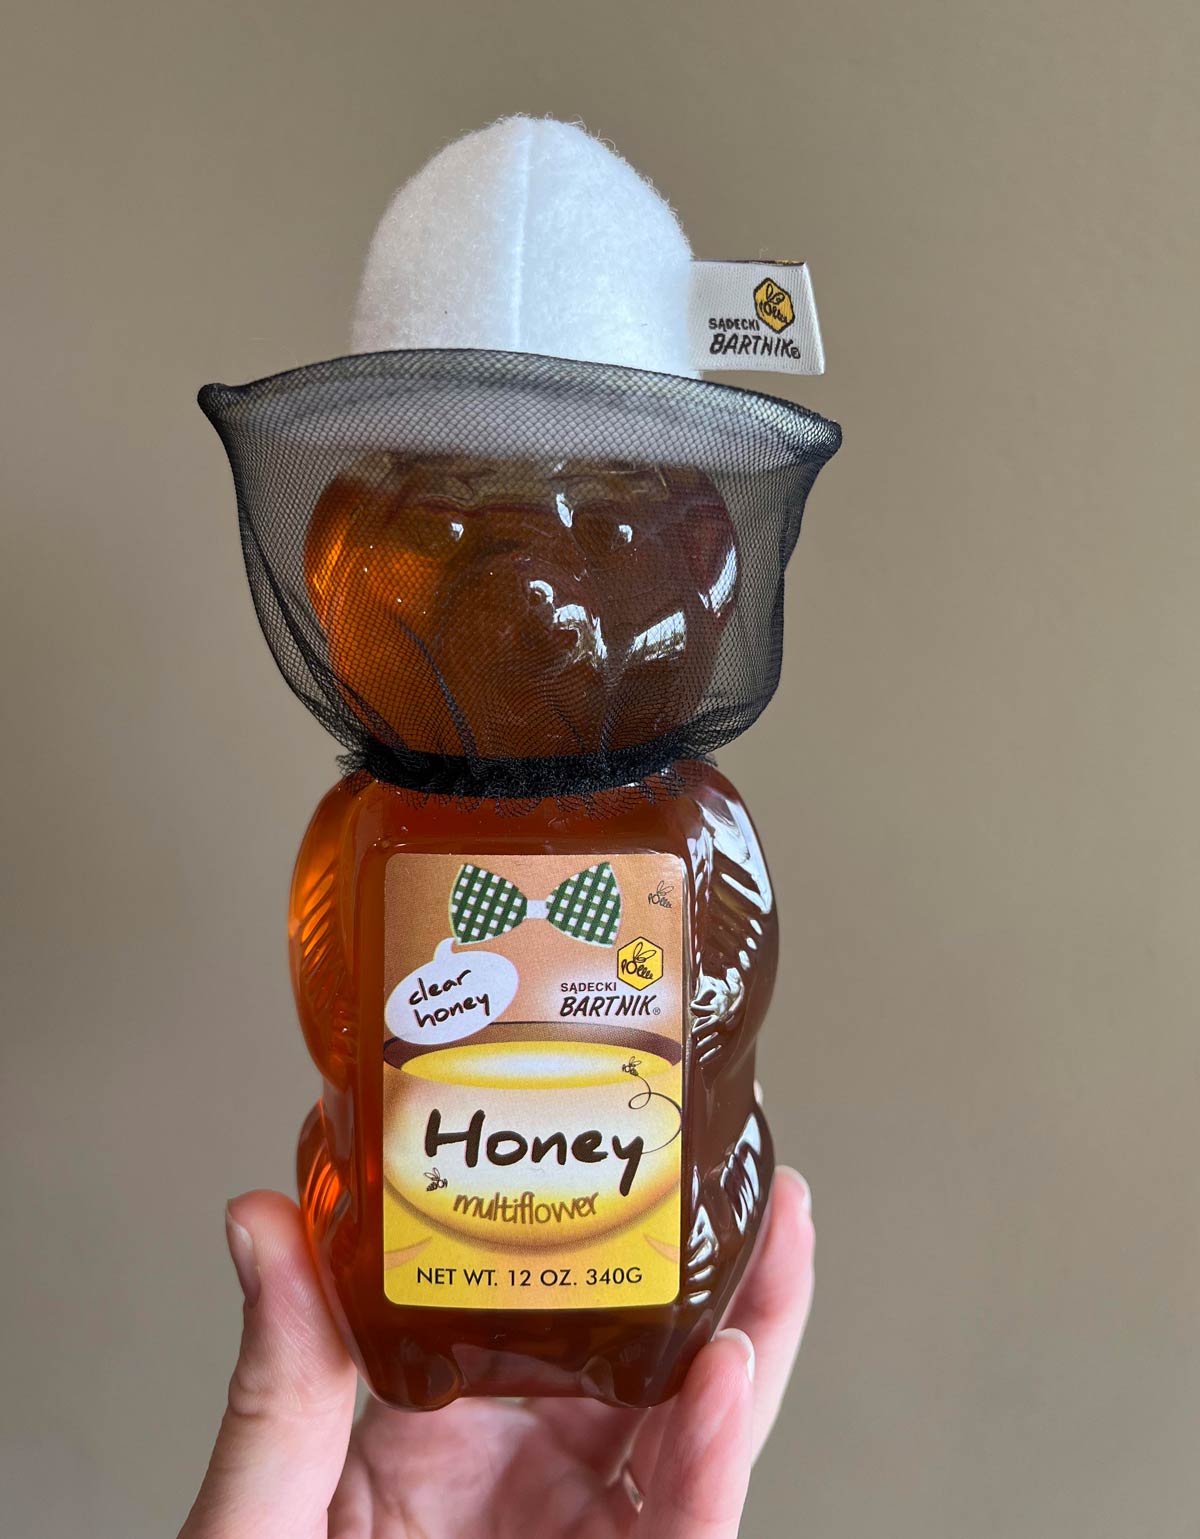 My honey came with a tiny handmade beekeeper's hat